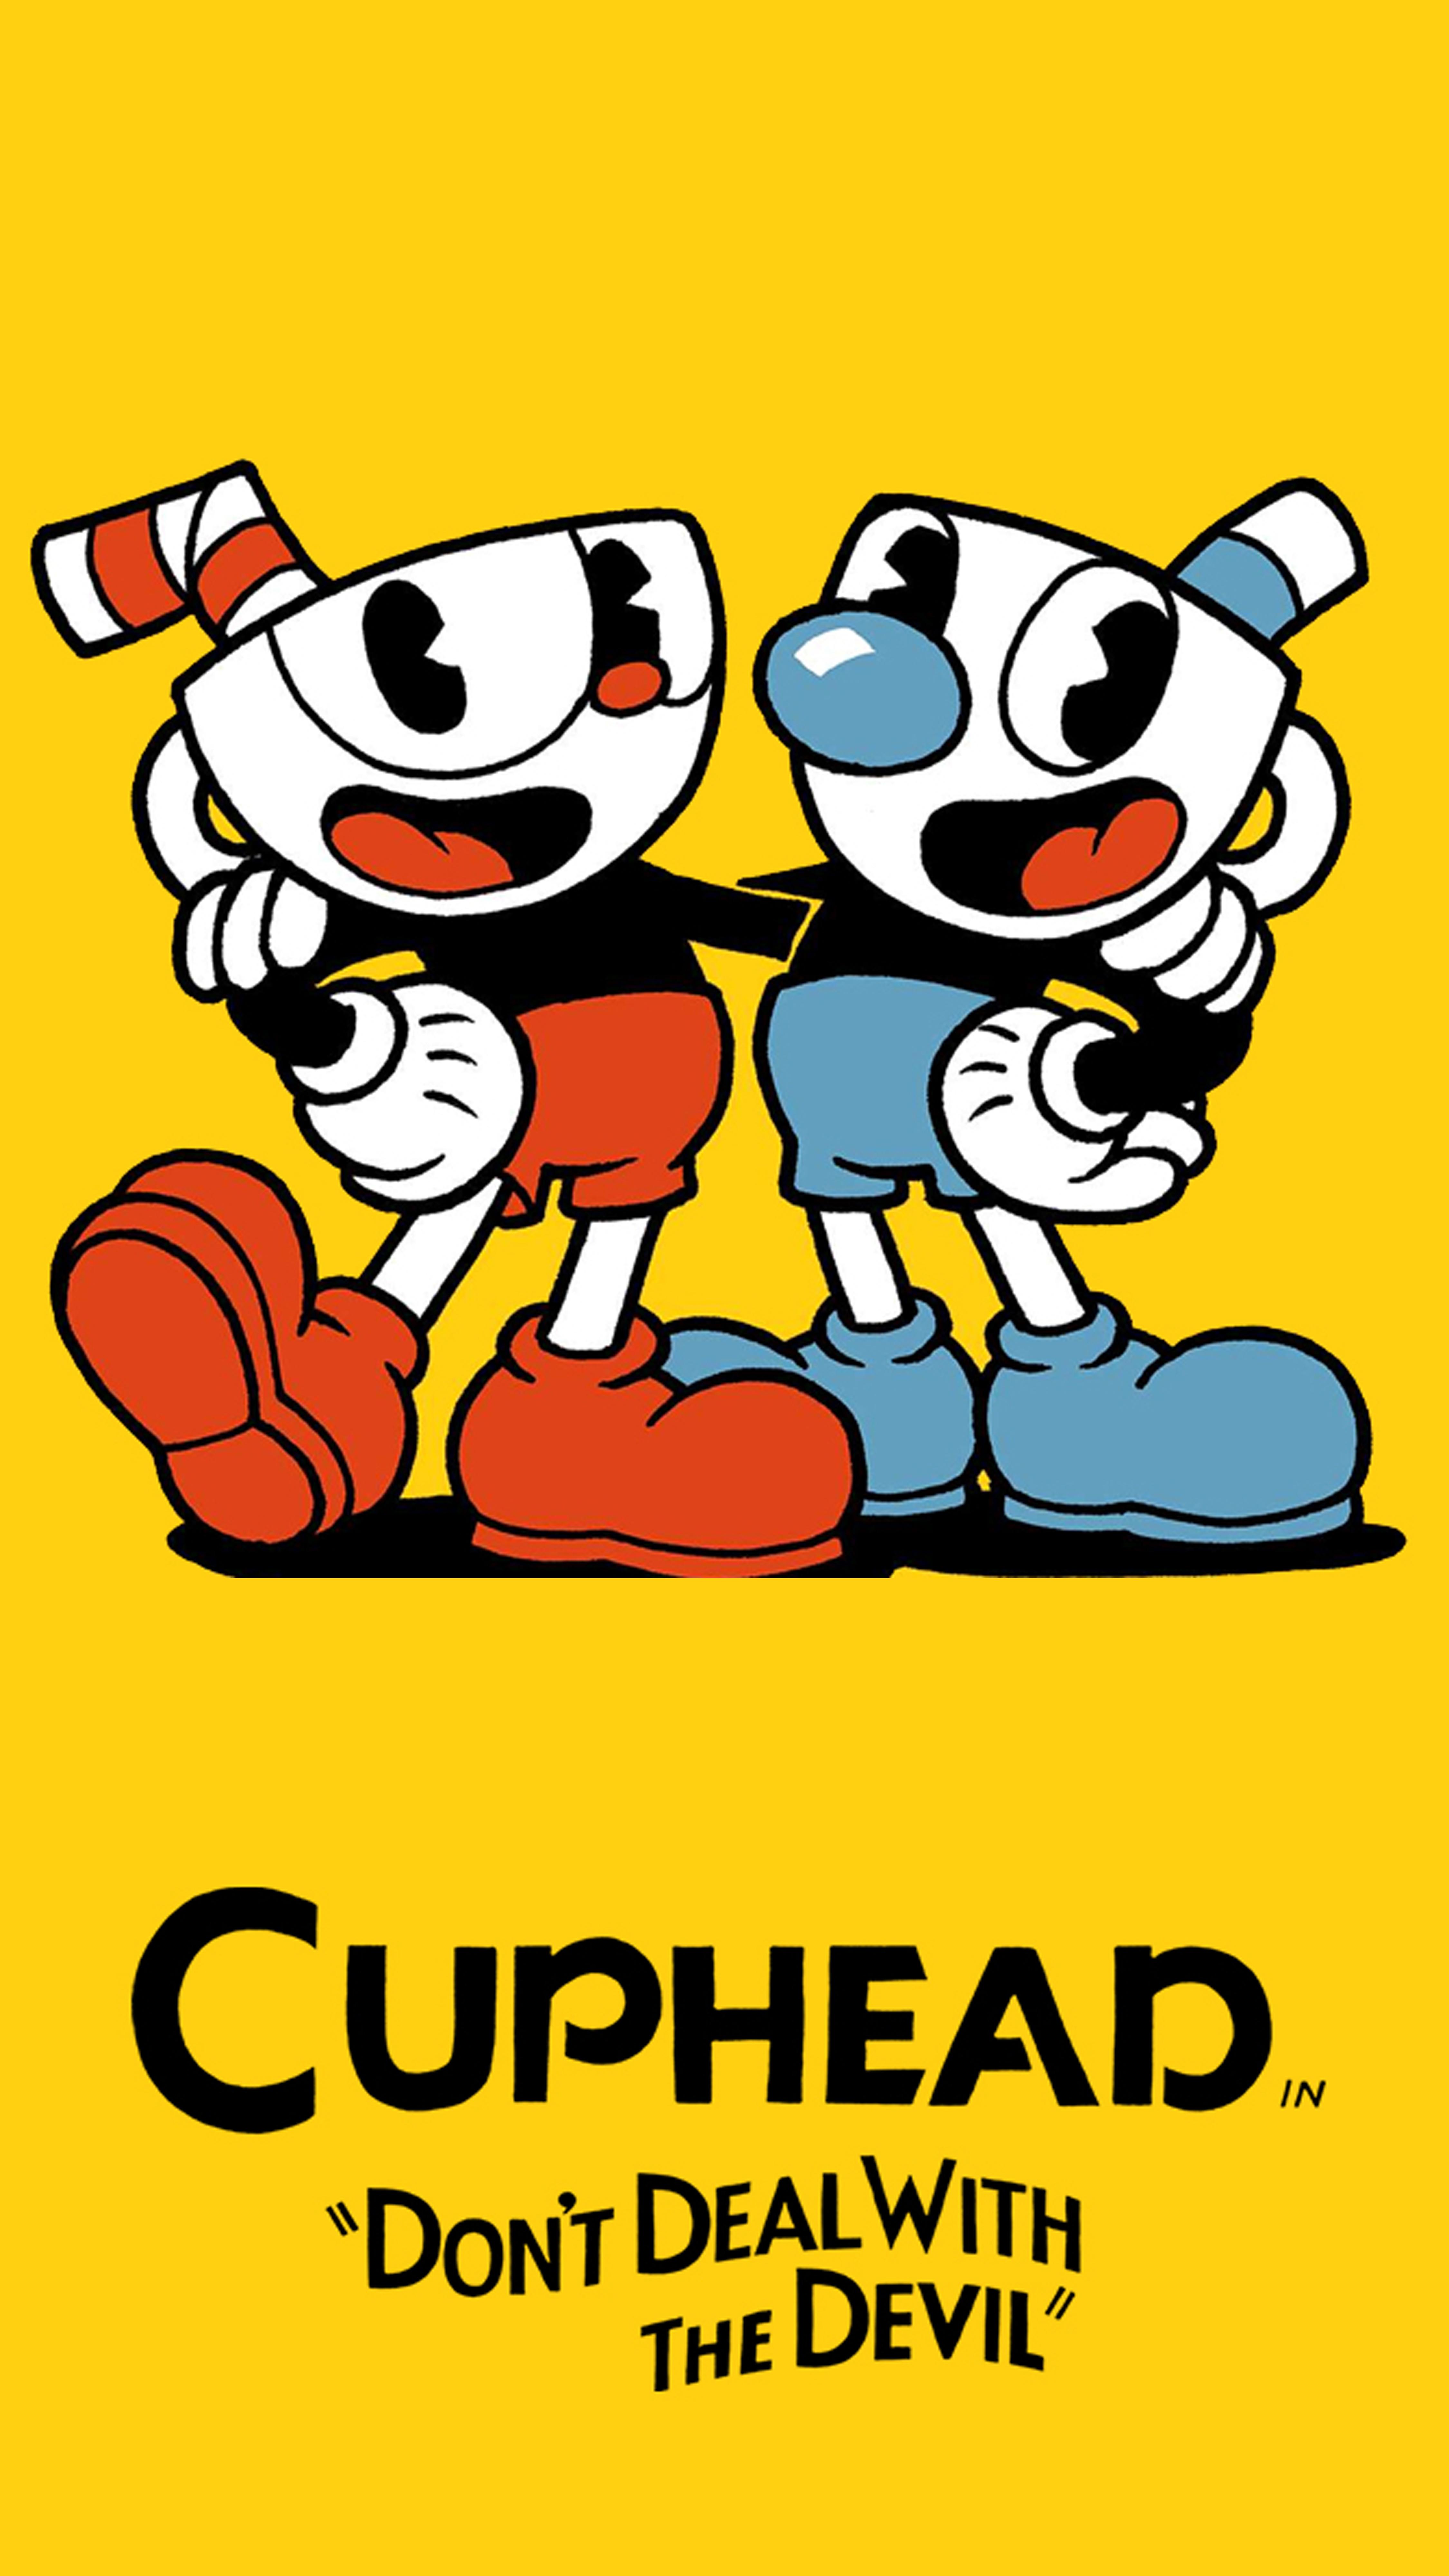 Here is a Cuphead phone wallpaper I threw together in photohop